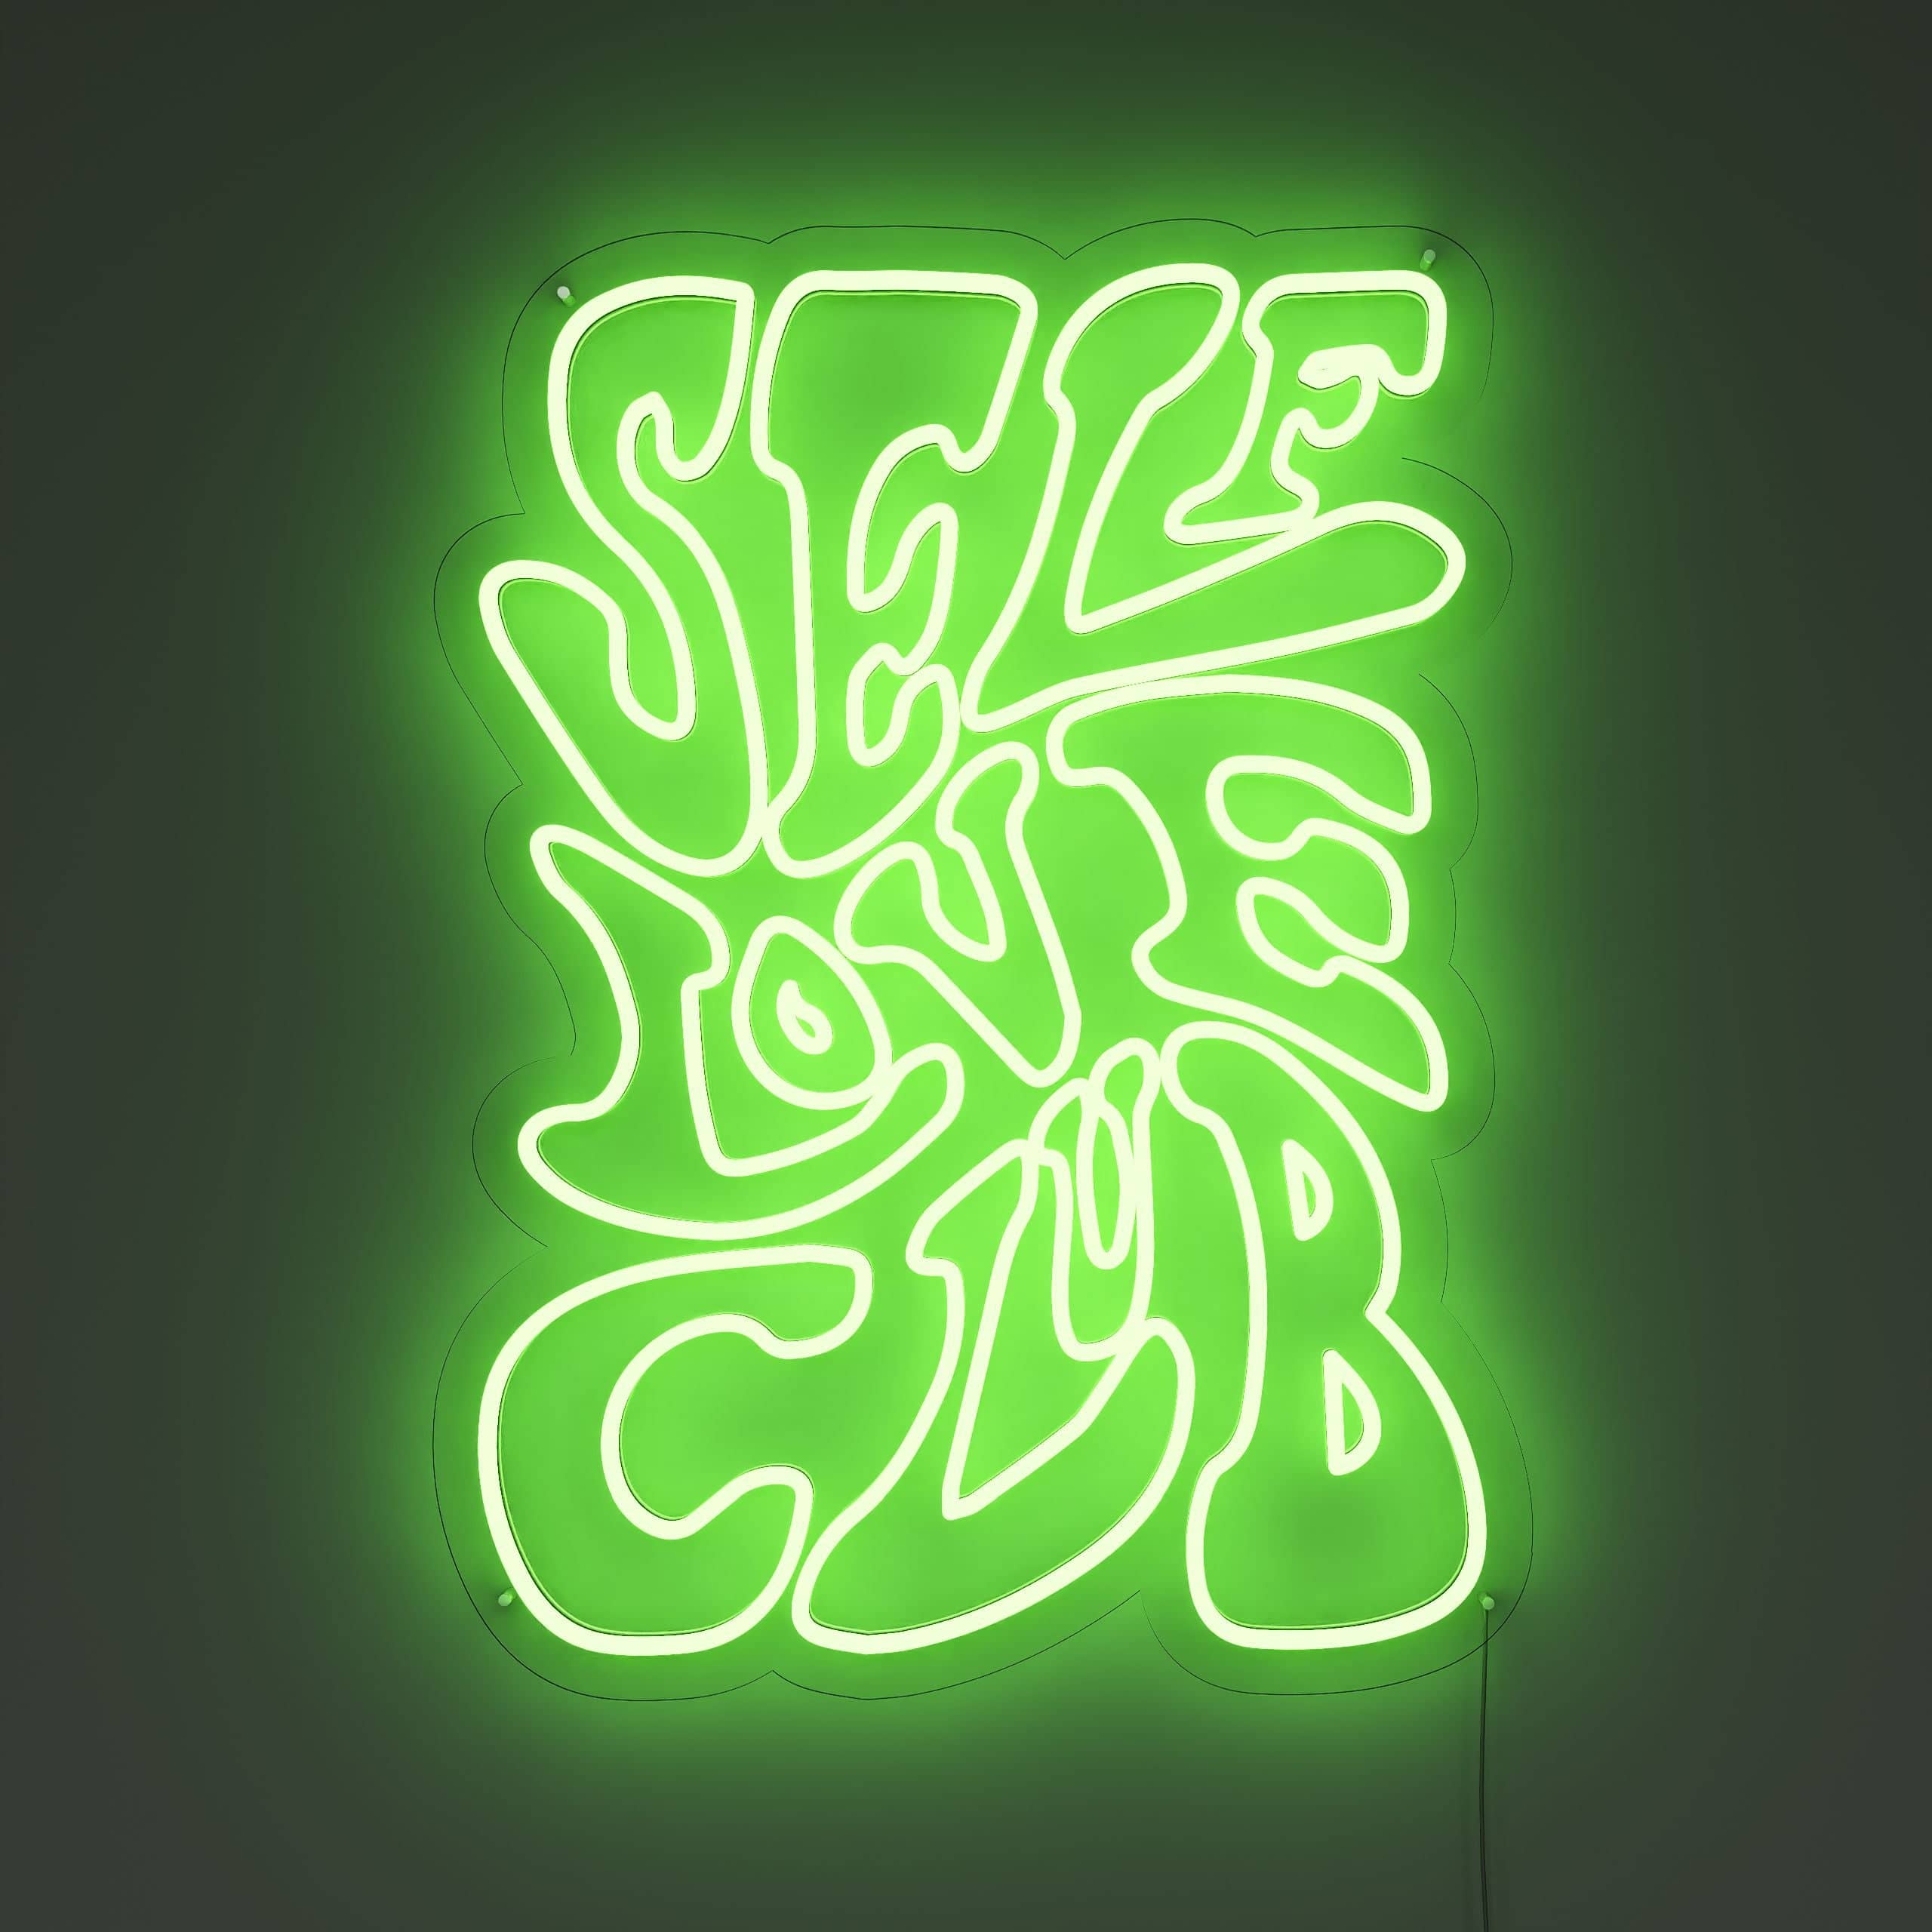 be-your-best-friend-society-neon-sign-lite